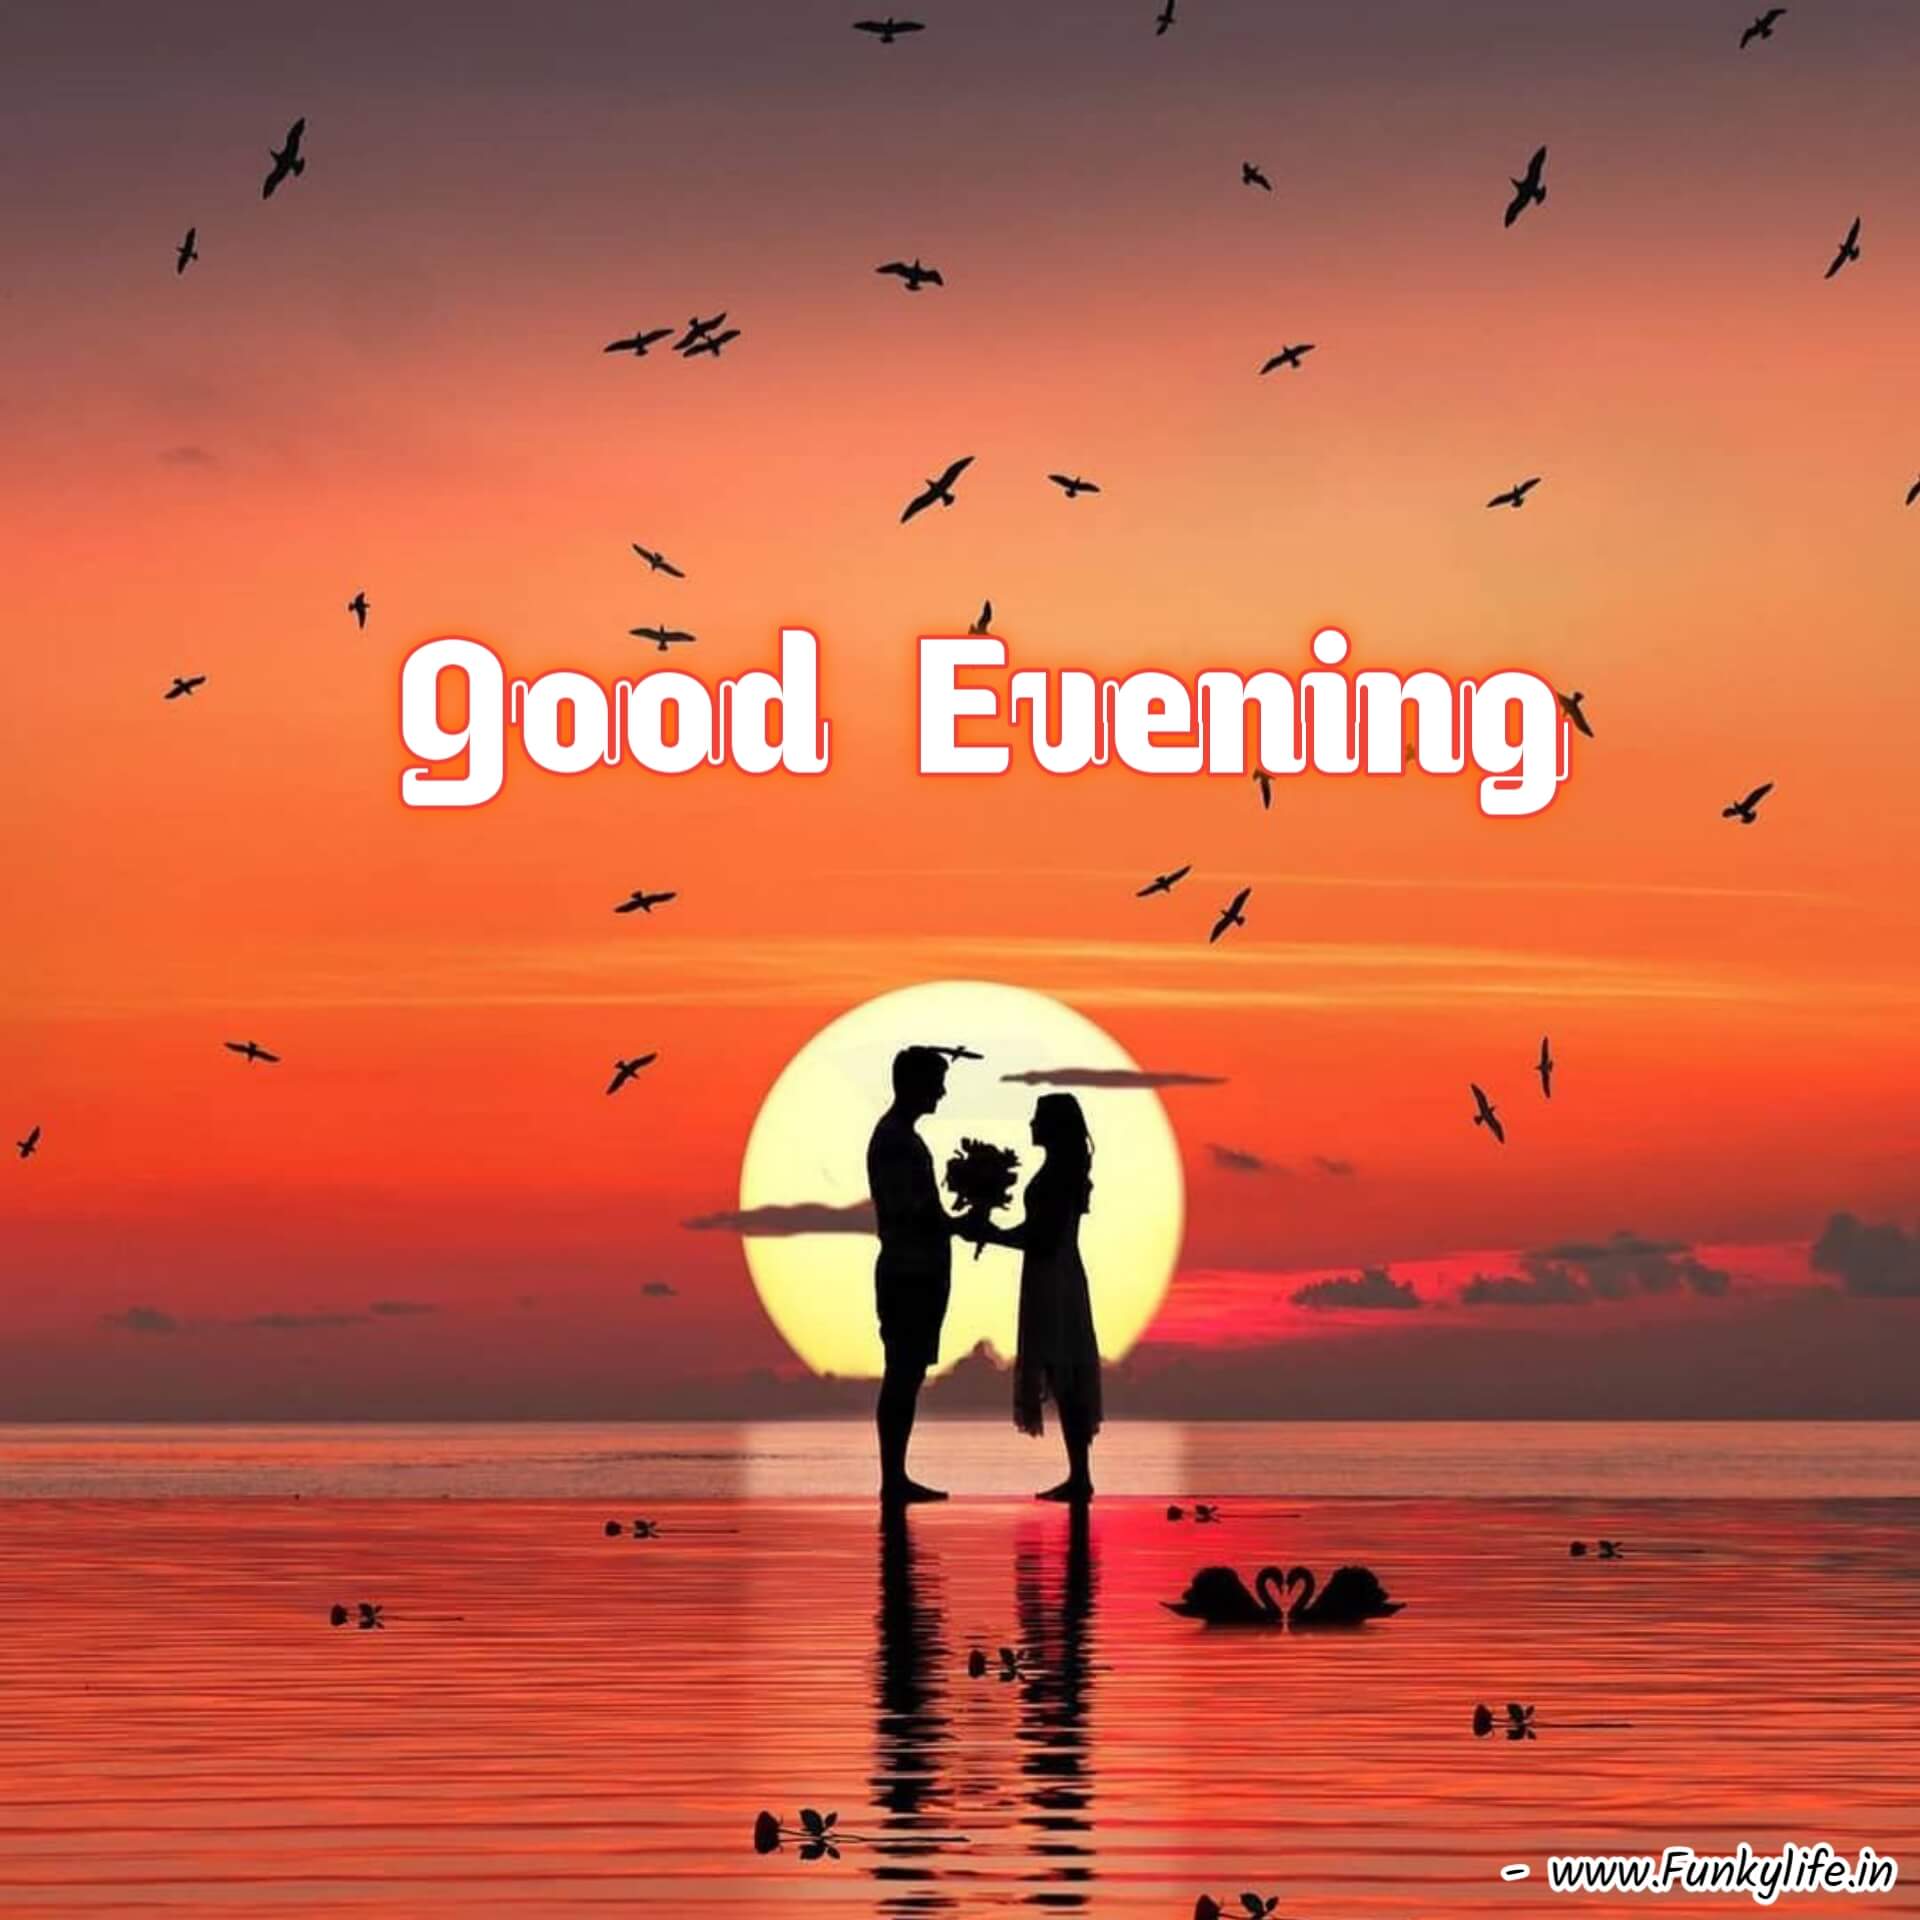 Lovely Good Evening Image